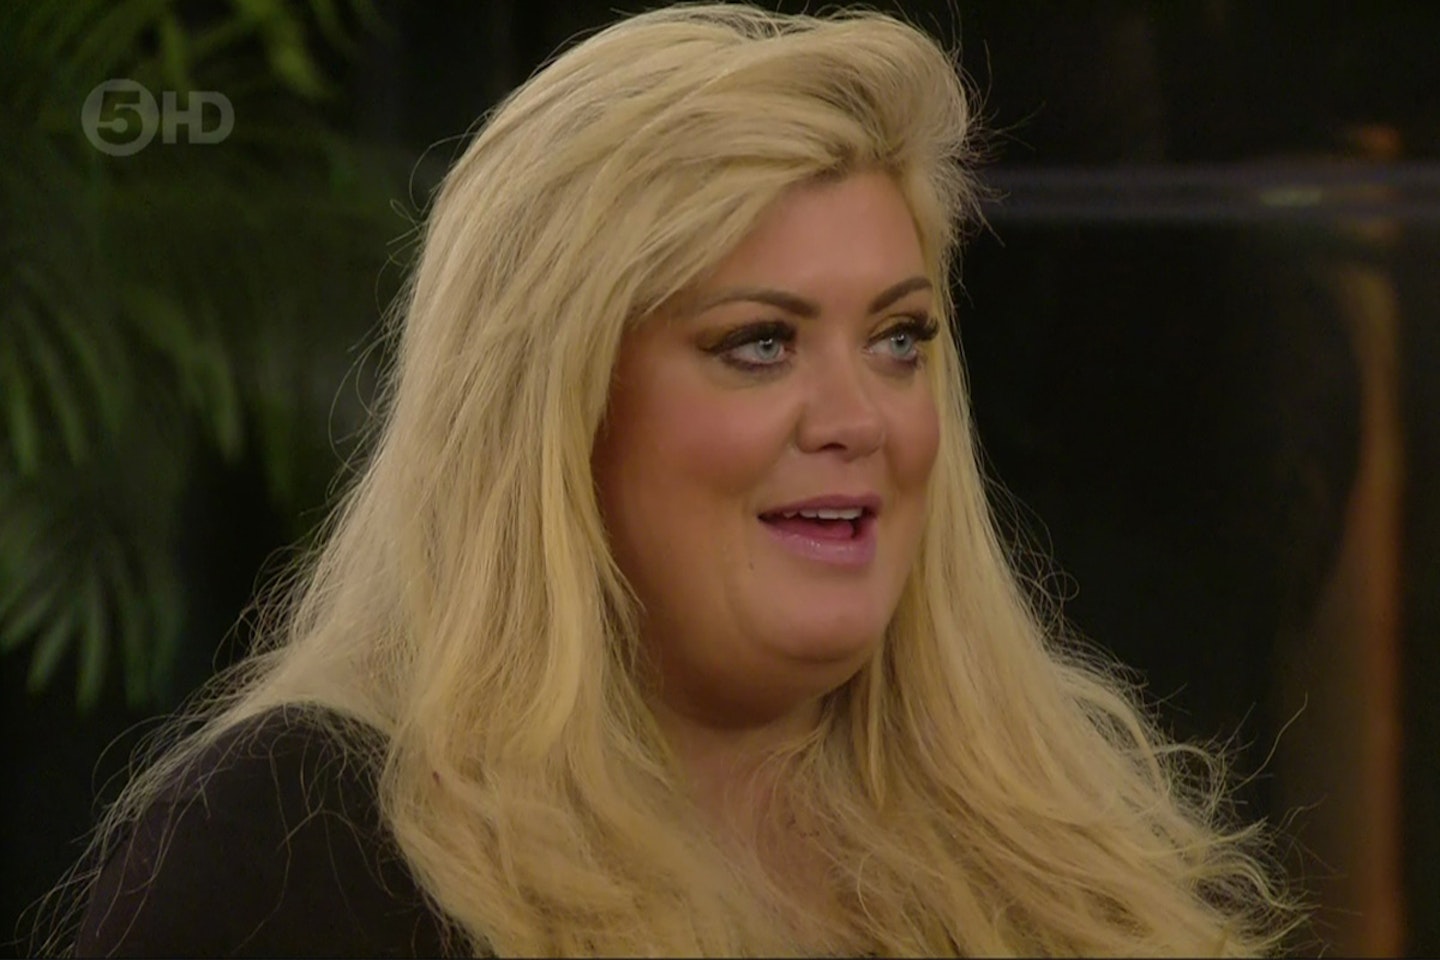 gemma collins in the celebrity big brother house